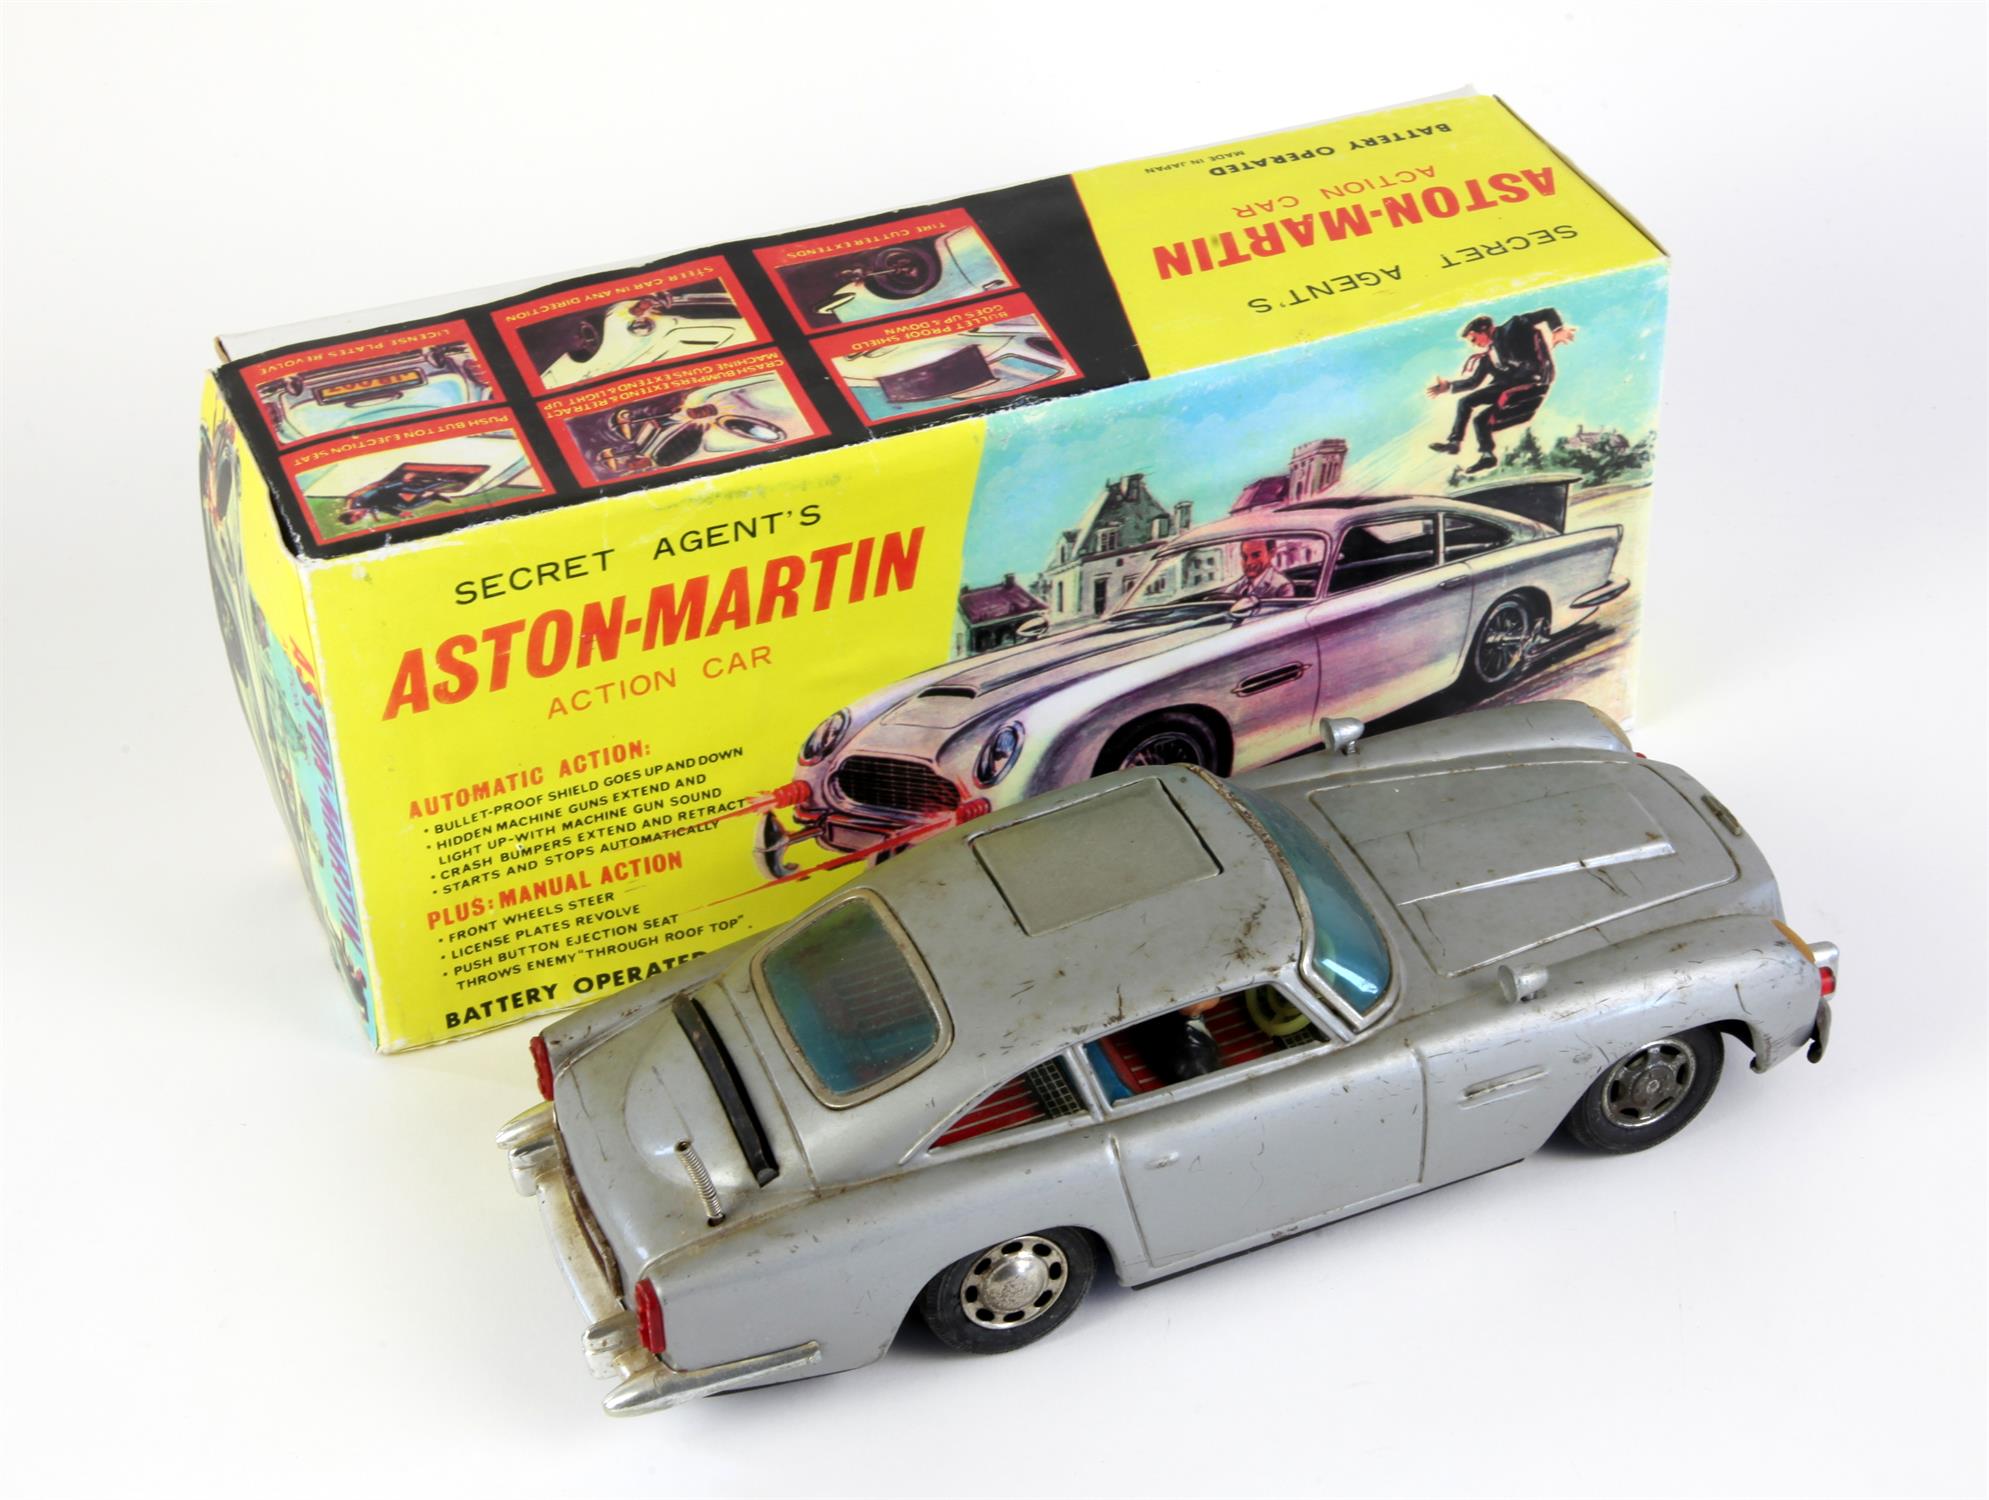 James Bond battery-operated Secret Agent's Aston-Martin Action Car in original box, Made in Japan. - Image 2 of 2